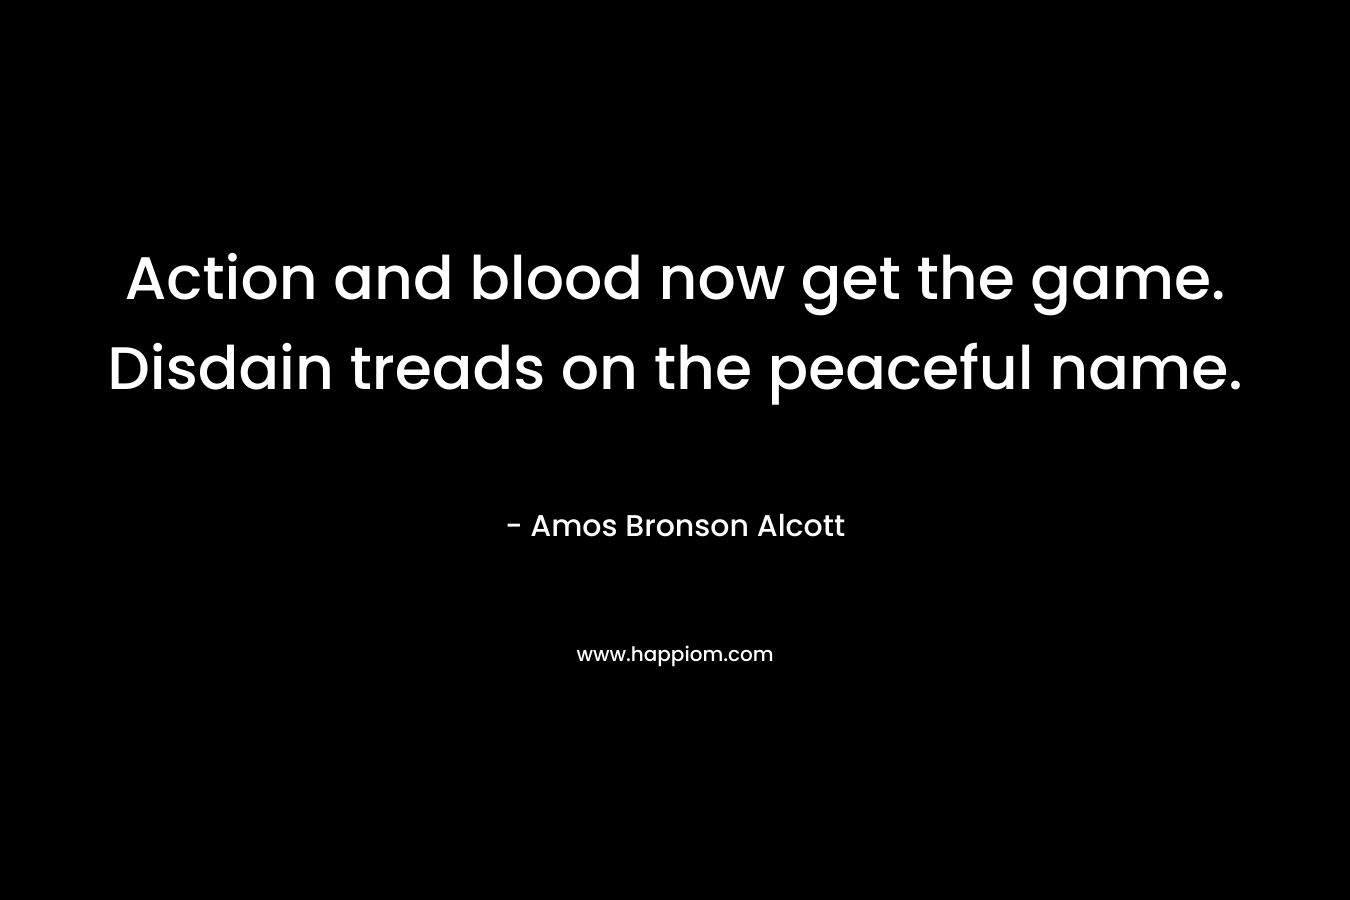 Action and blood now get the game. Disdain treads on the peaceful name. – Amos Bronson Alcott